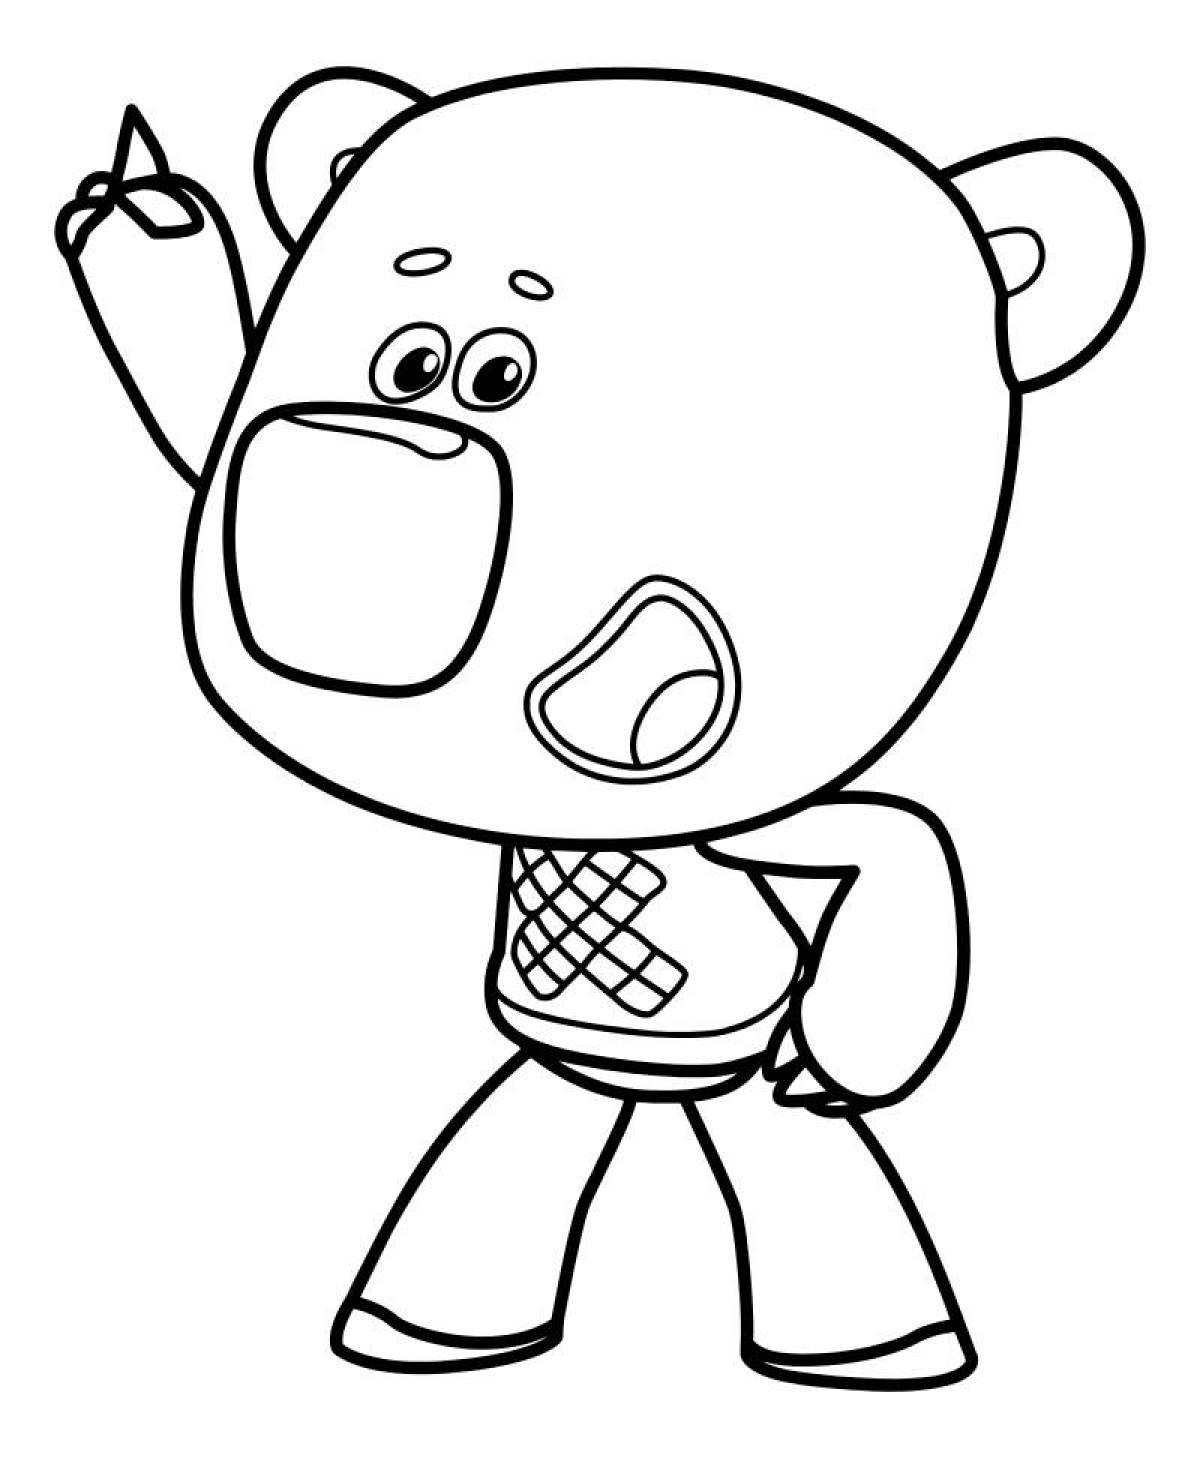 Turn on the cute bear coloring #6